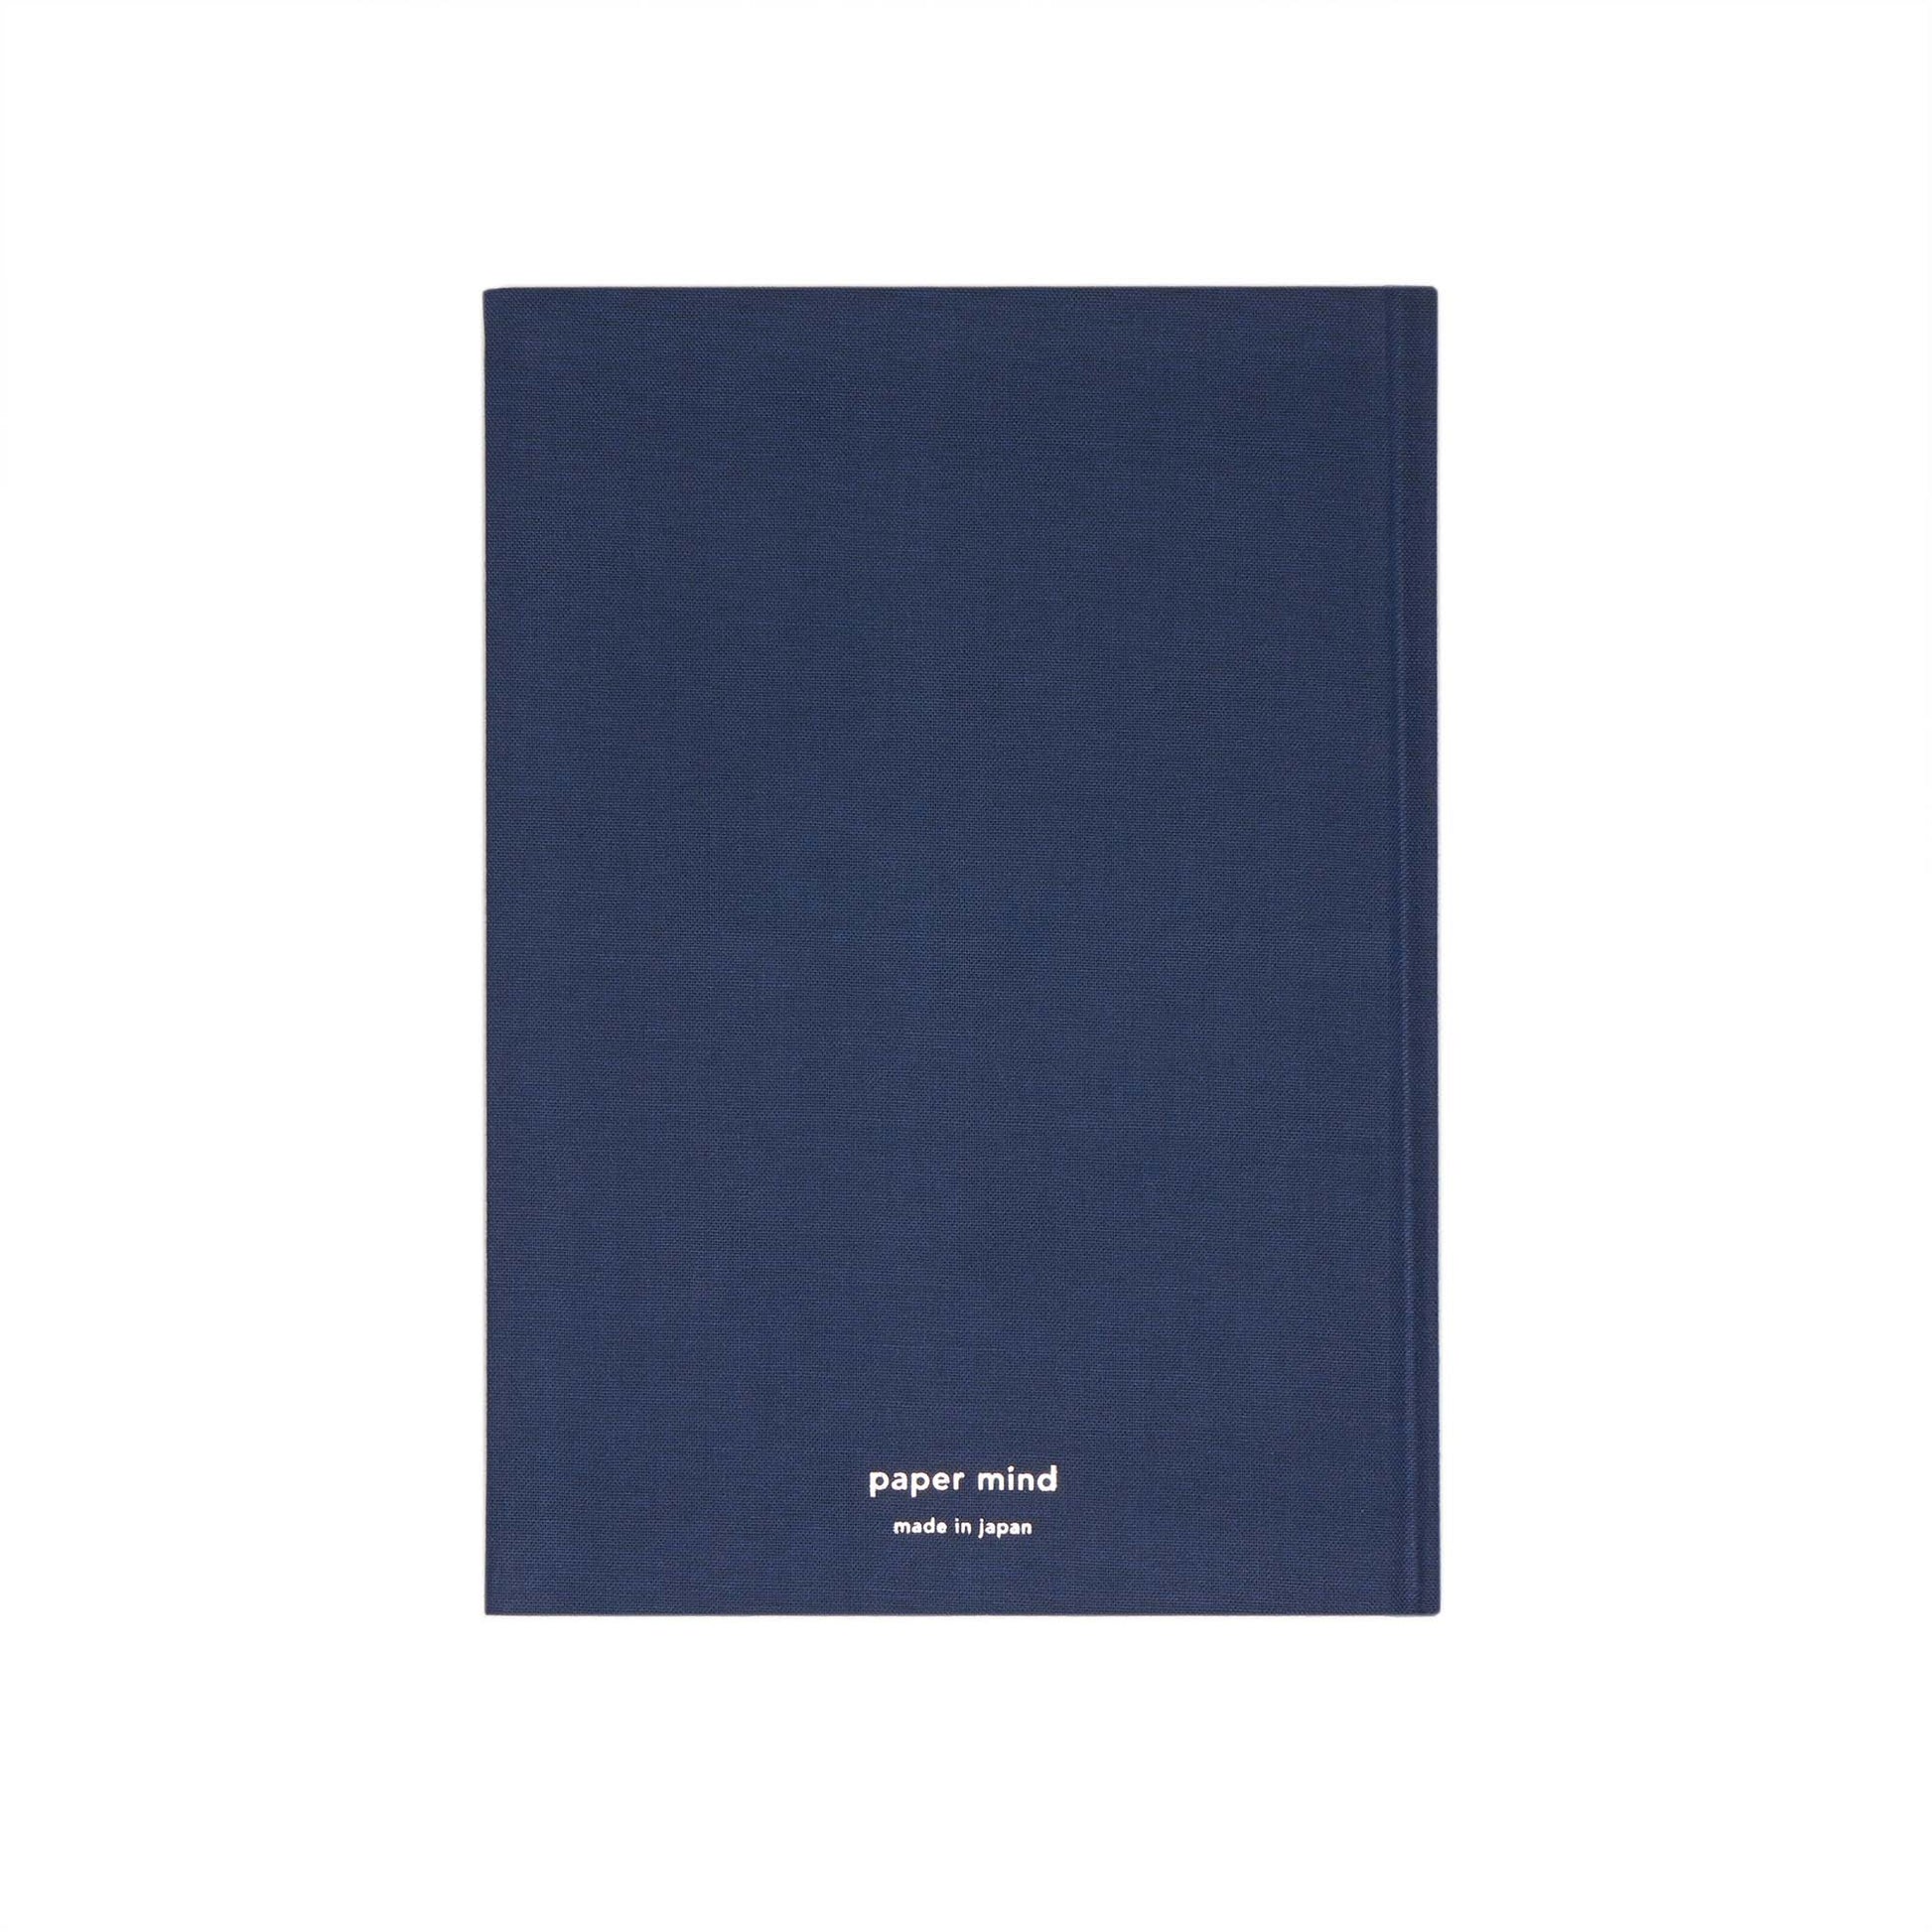 The Paper Mind Cosmo Air Light Hardcover Notebook. Fountain pen friendly Journal. Navy Blue Japanese Linen Cover. Back cover shown with The Paper Mind silver foil logo